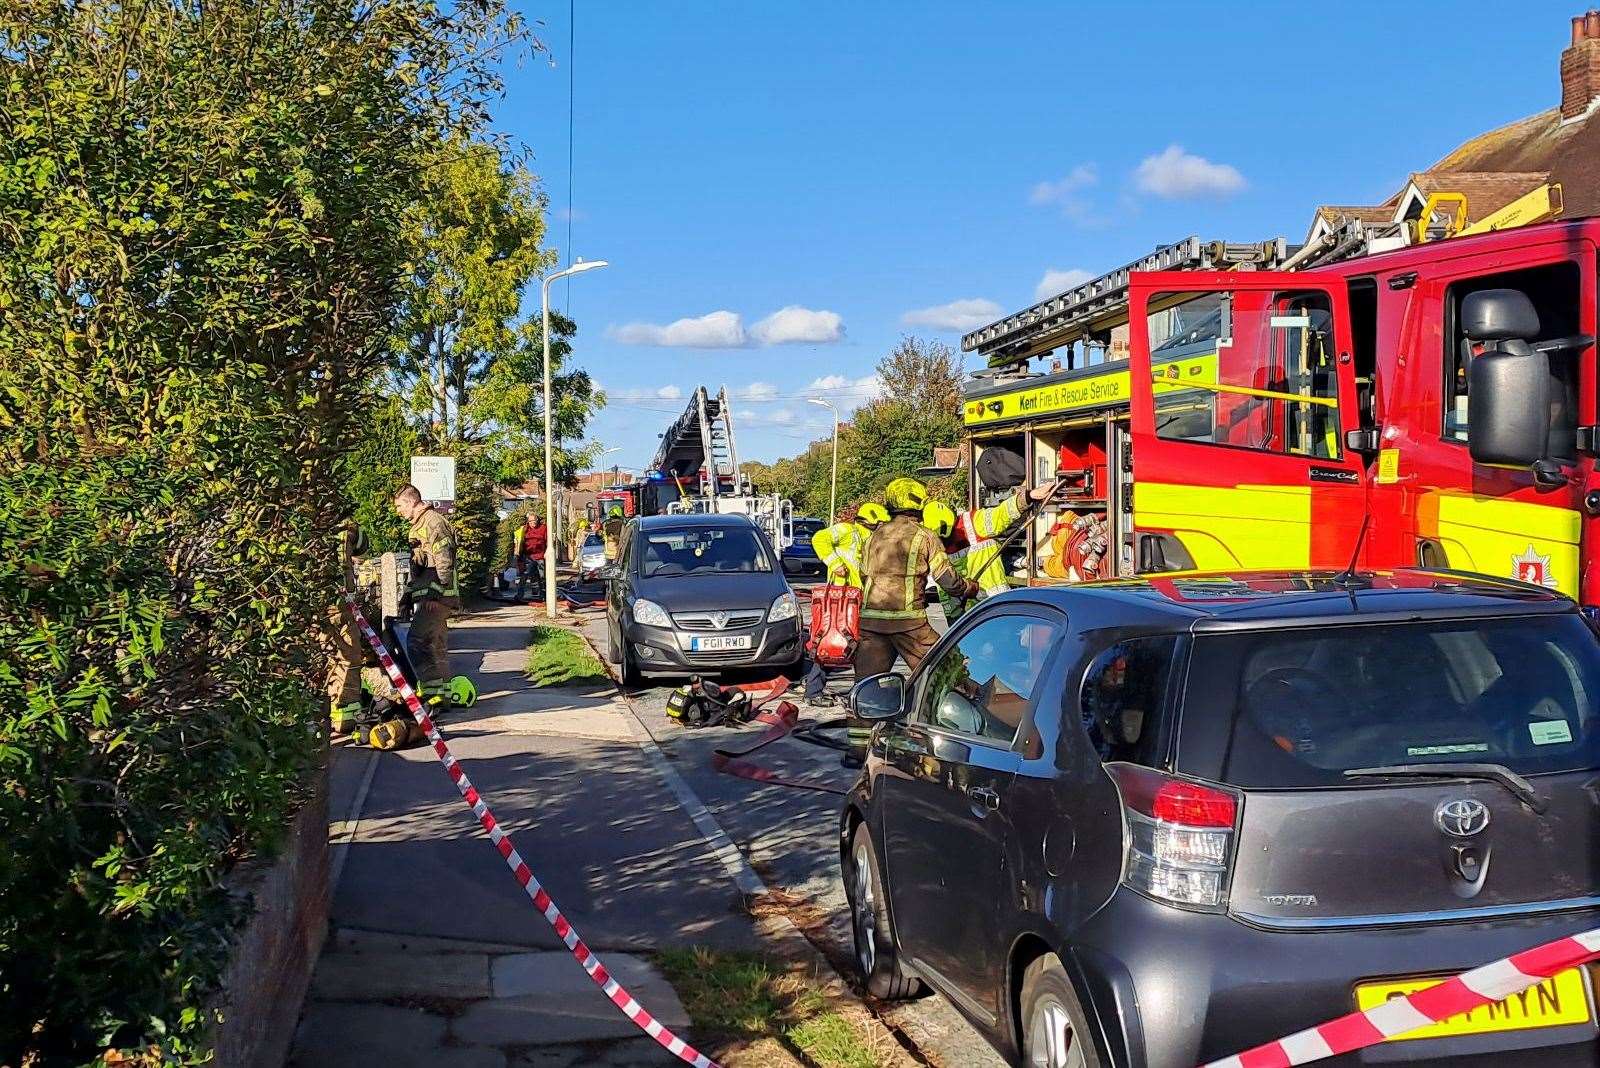 Firefighters were called to a bungalow fire in Mickleburgh Avenue, Herne Bay